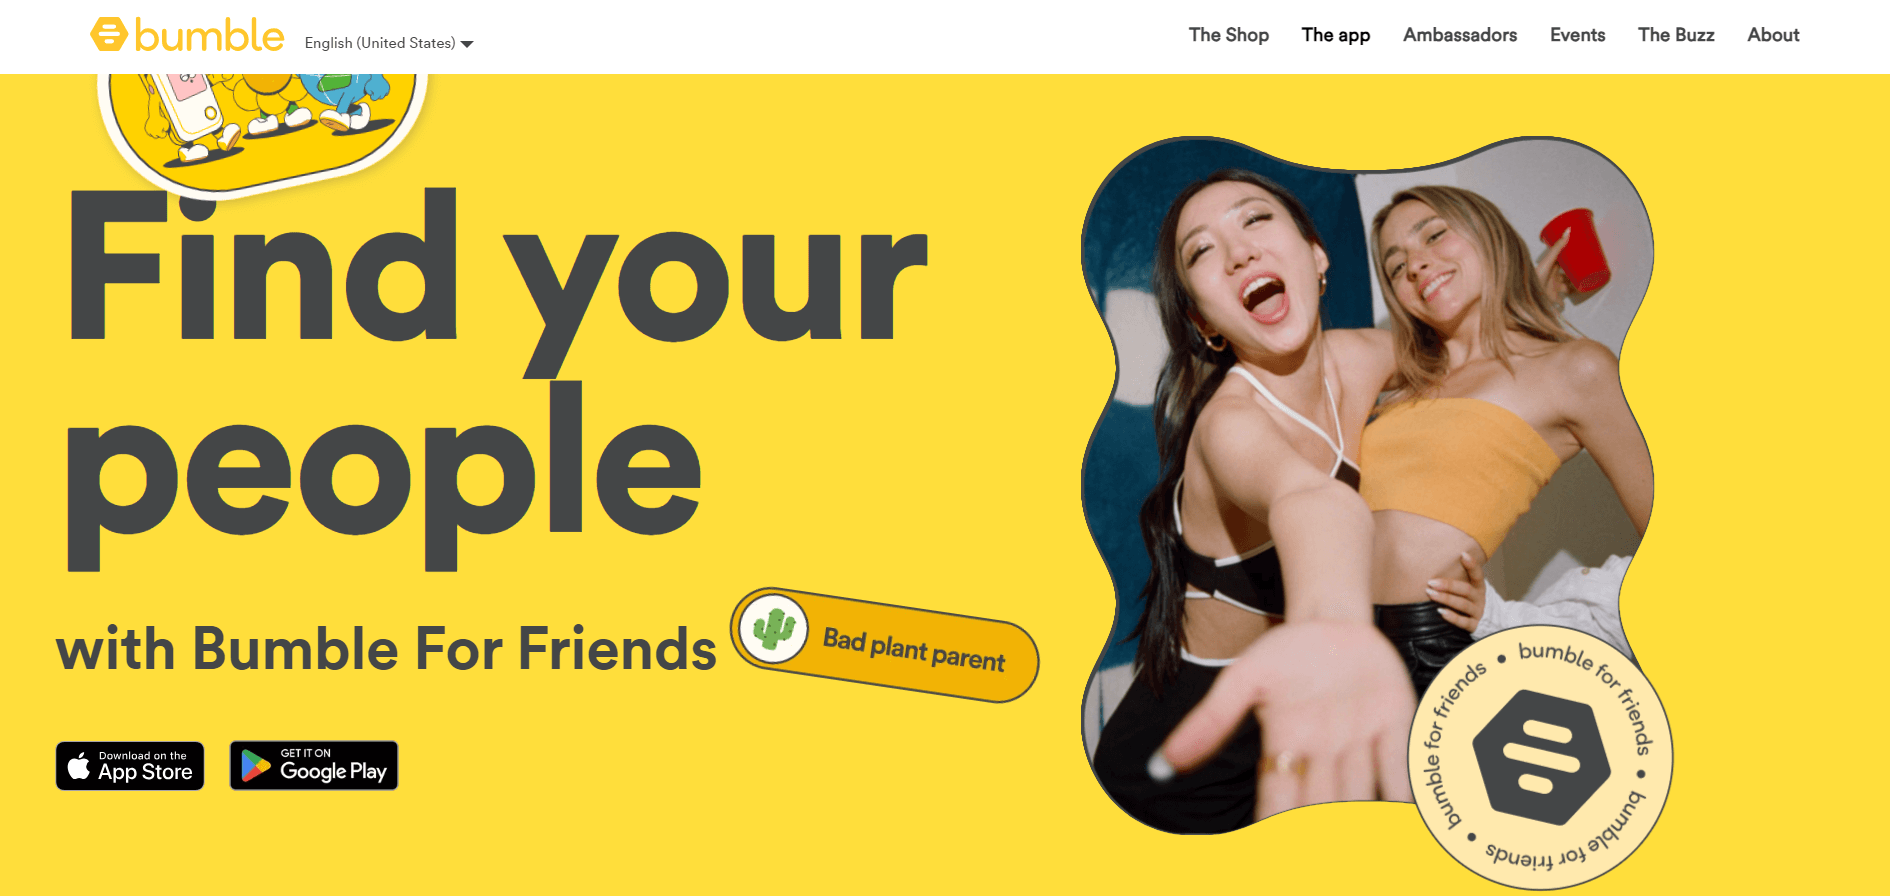 bumble for friends mobile campaign